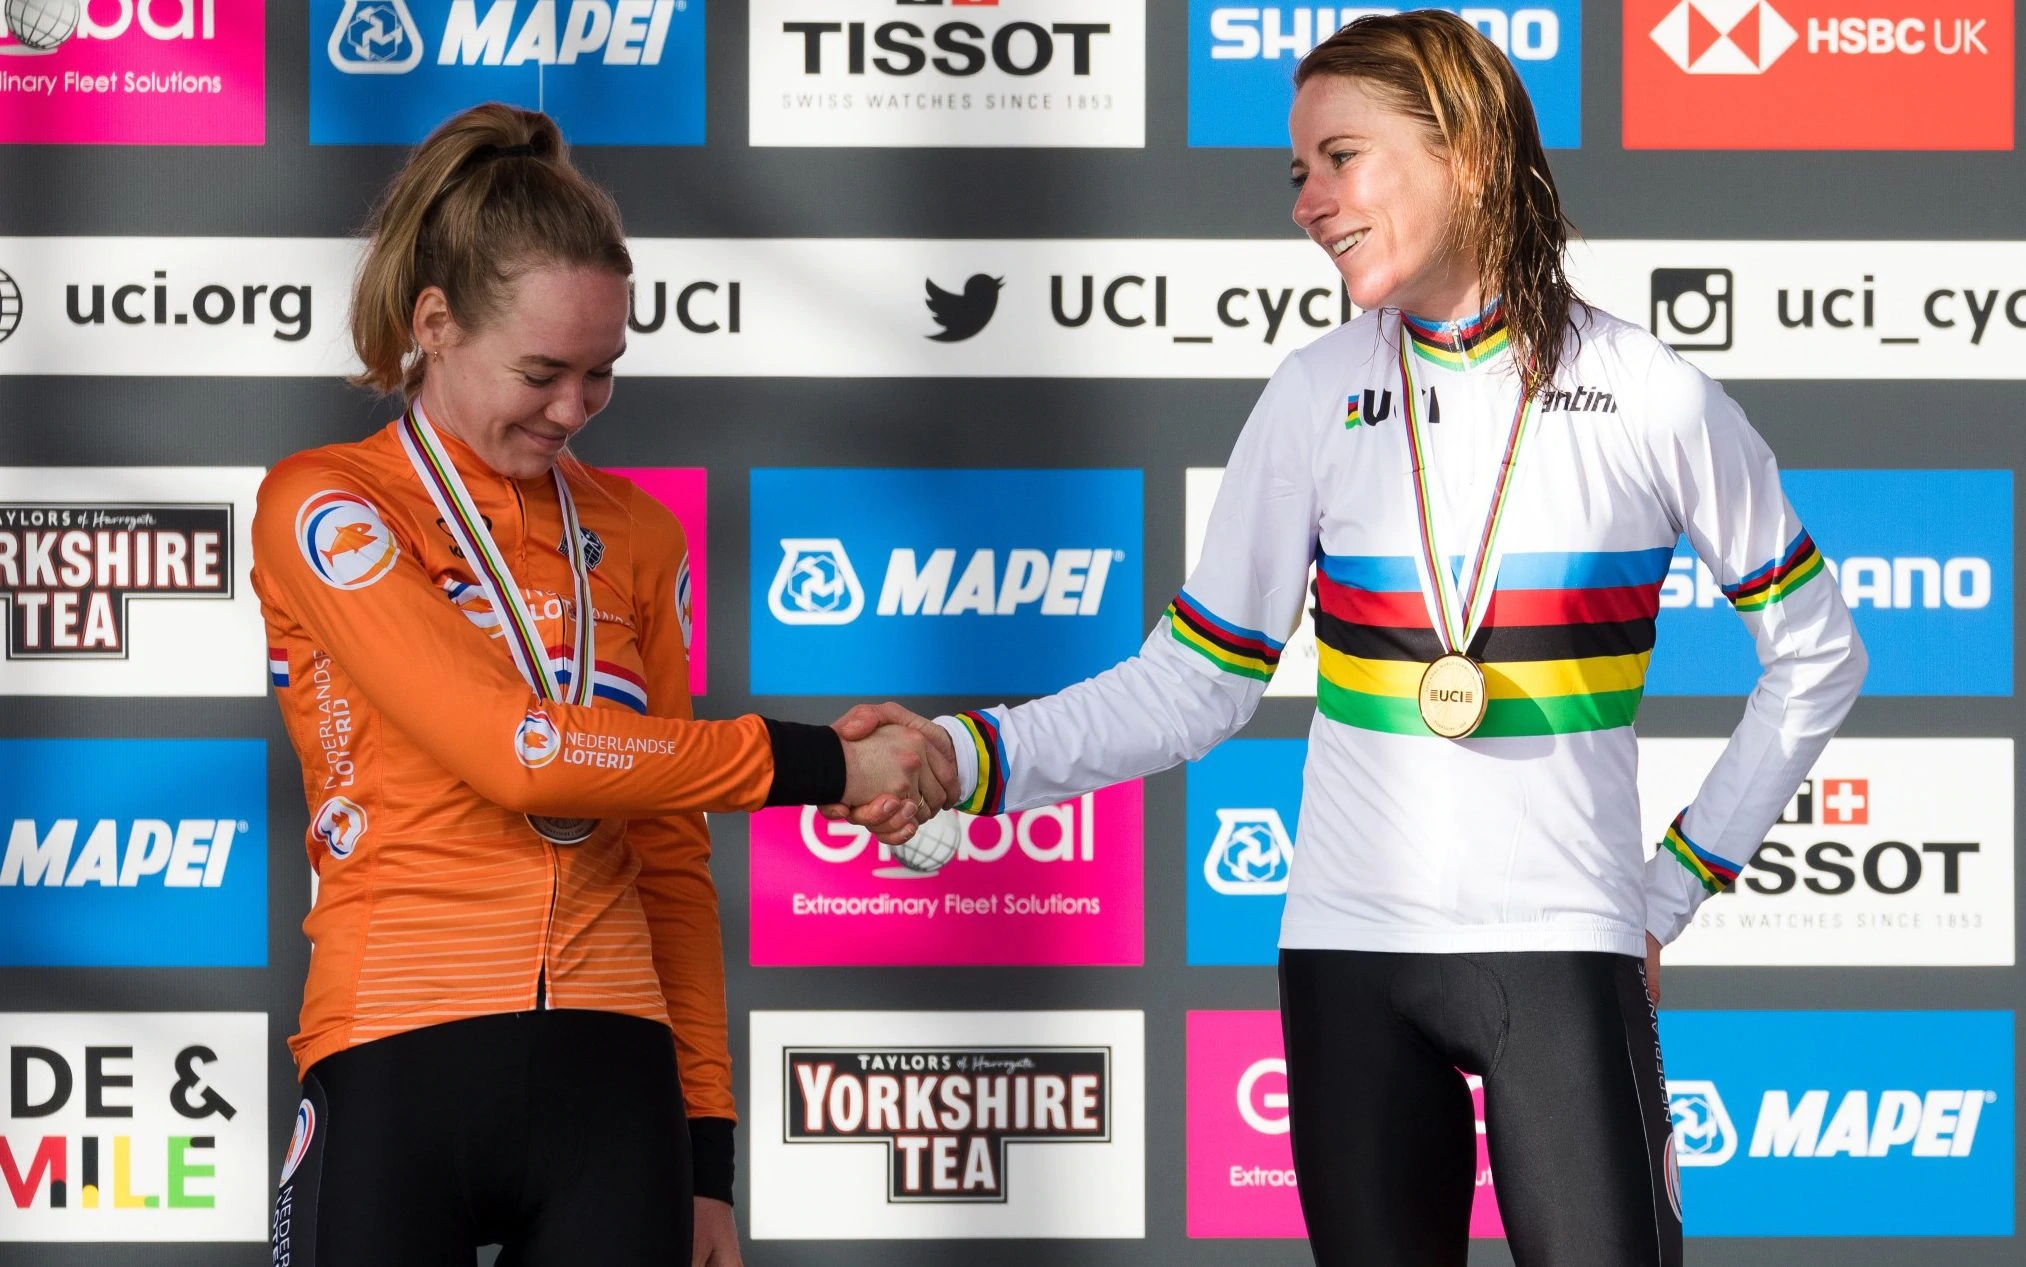 Annemiek van Vleuten, of the Netherlands, takes the rainbow jersey after winning the elite women’s road race at the 2020 UCI Road World Championships in Yorkshire